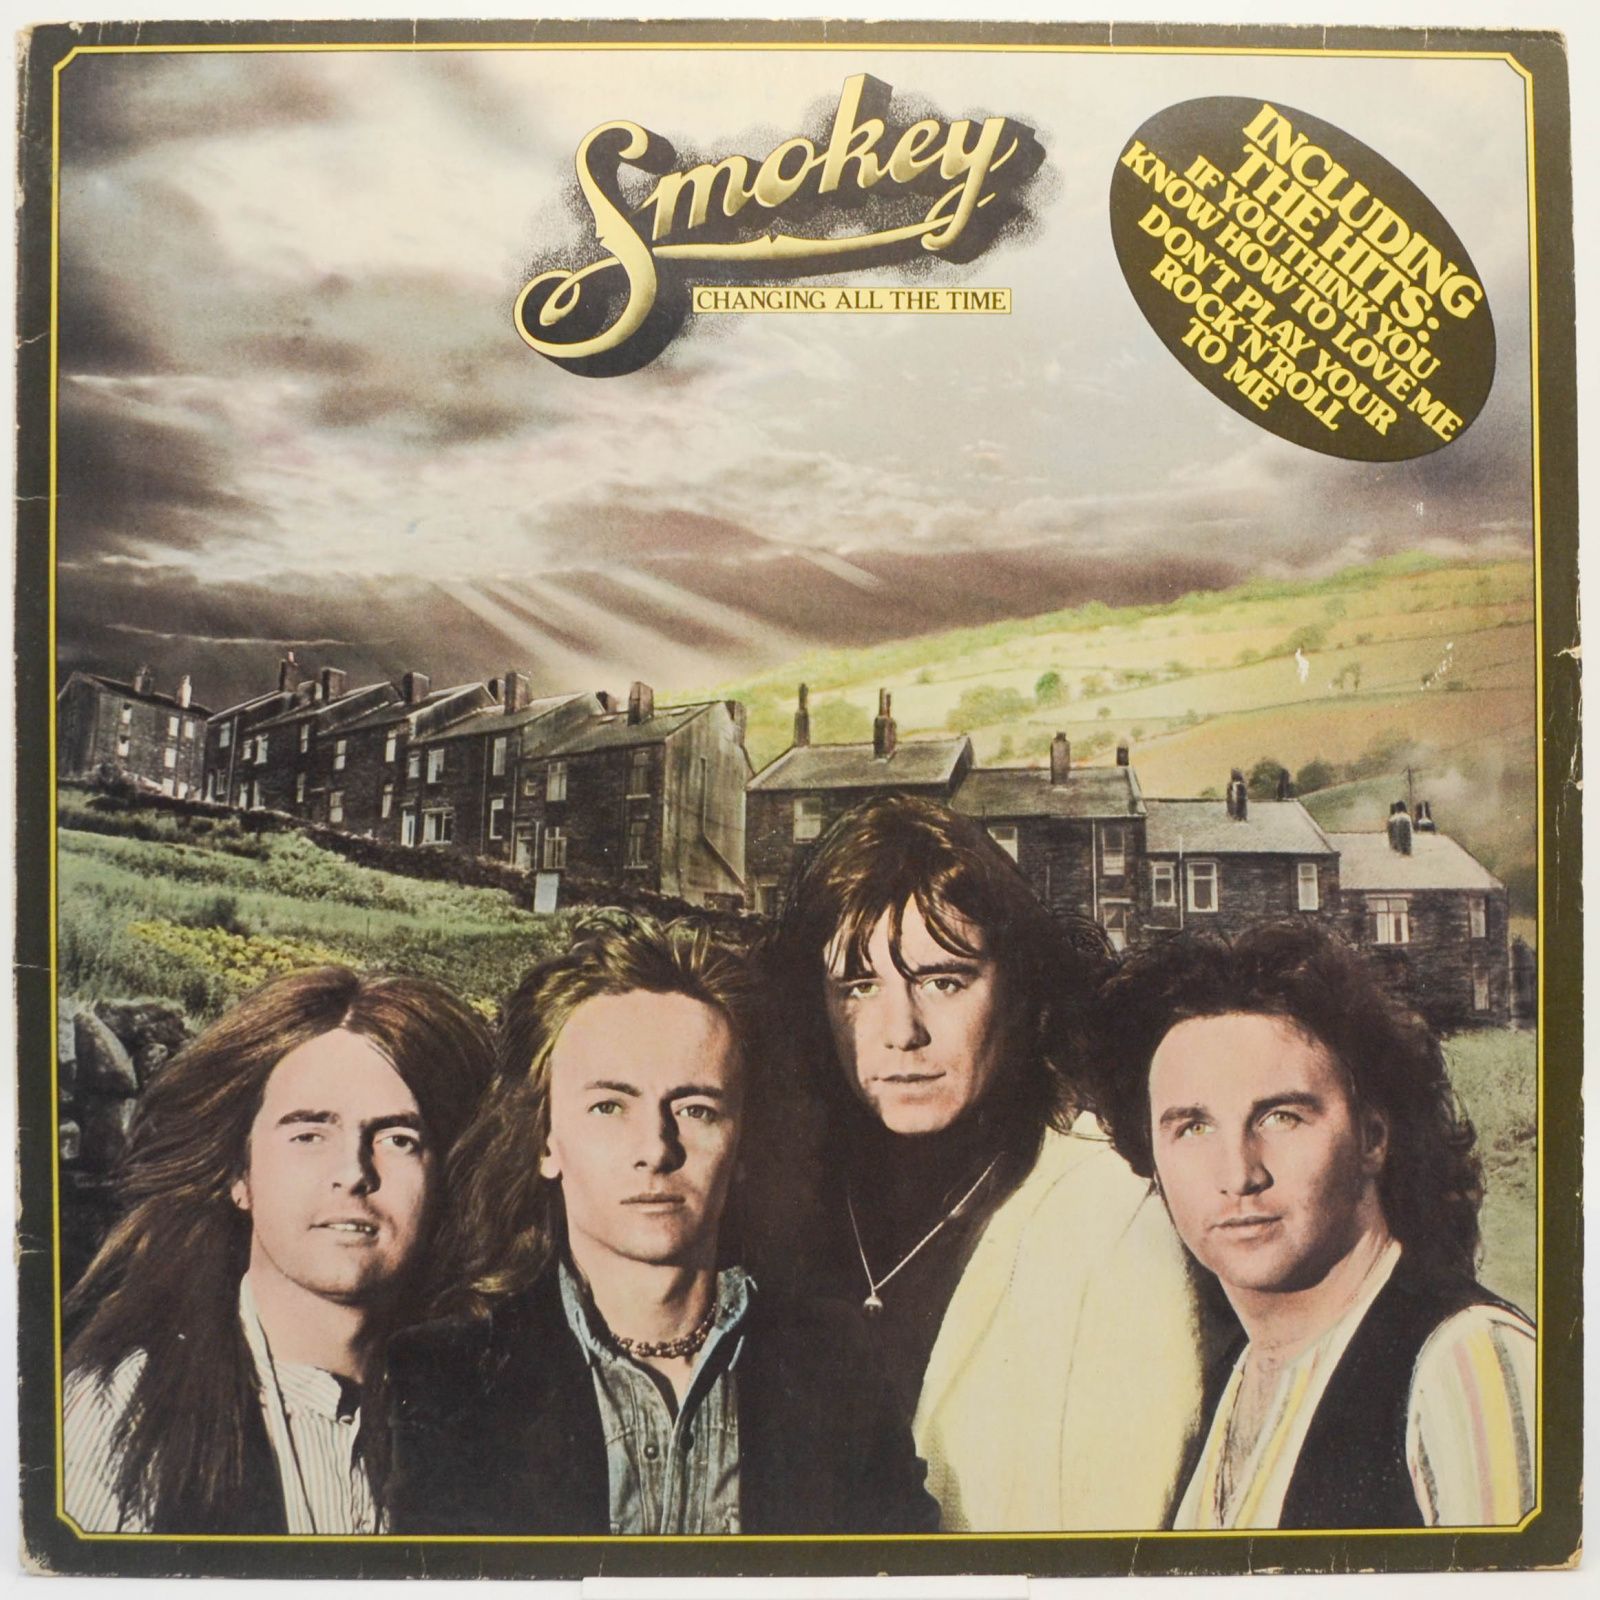 Smokey — Changing All The Time, 1975